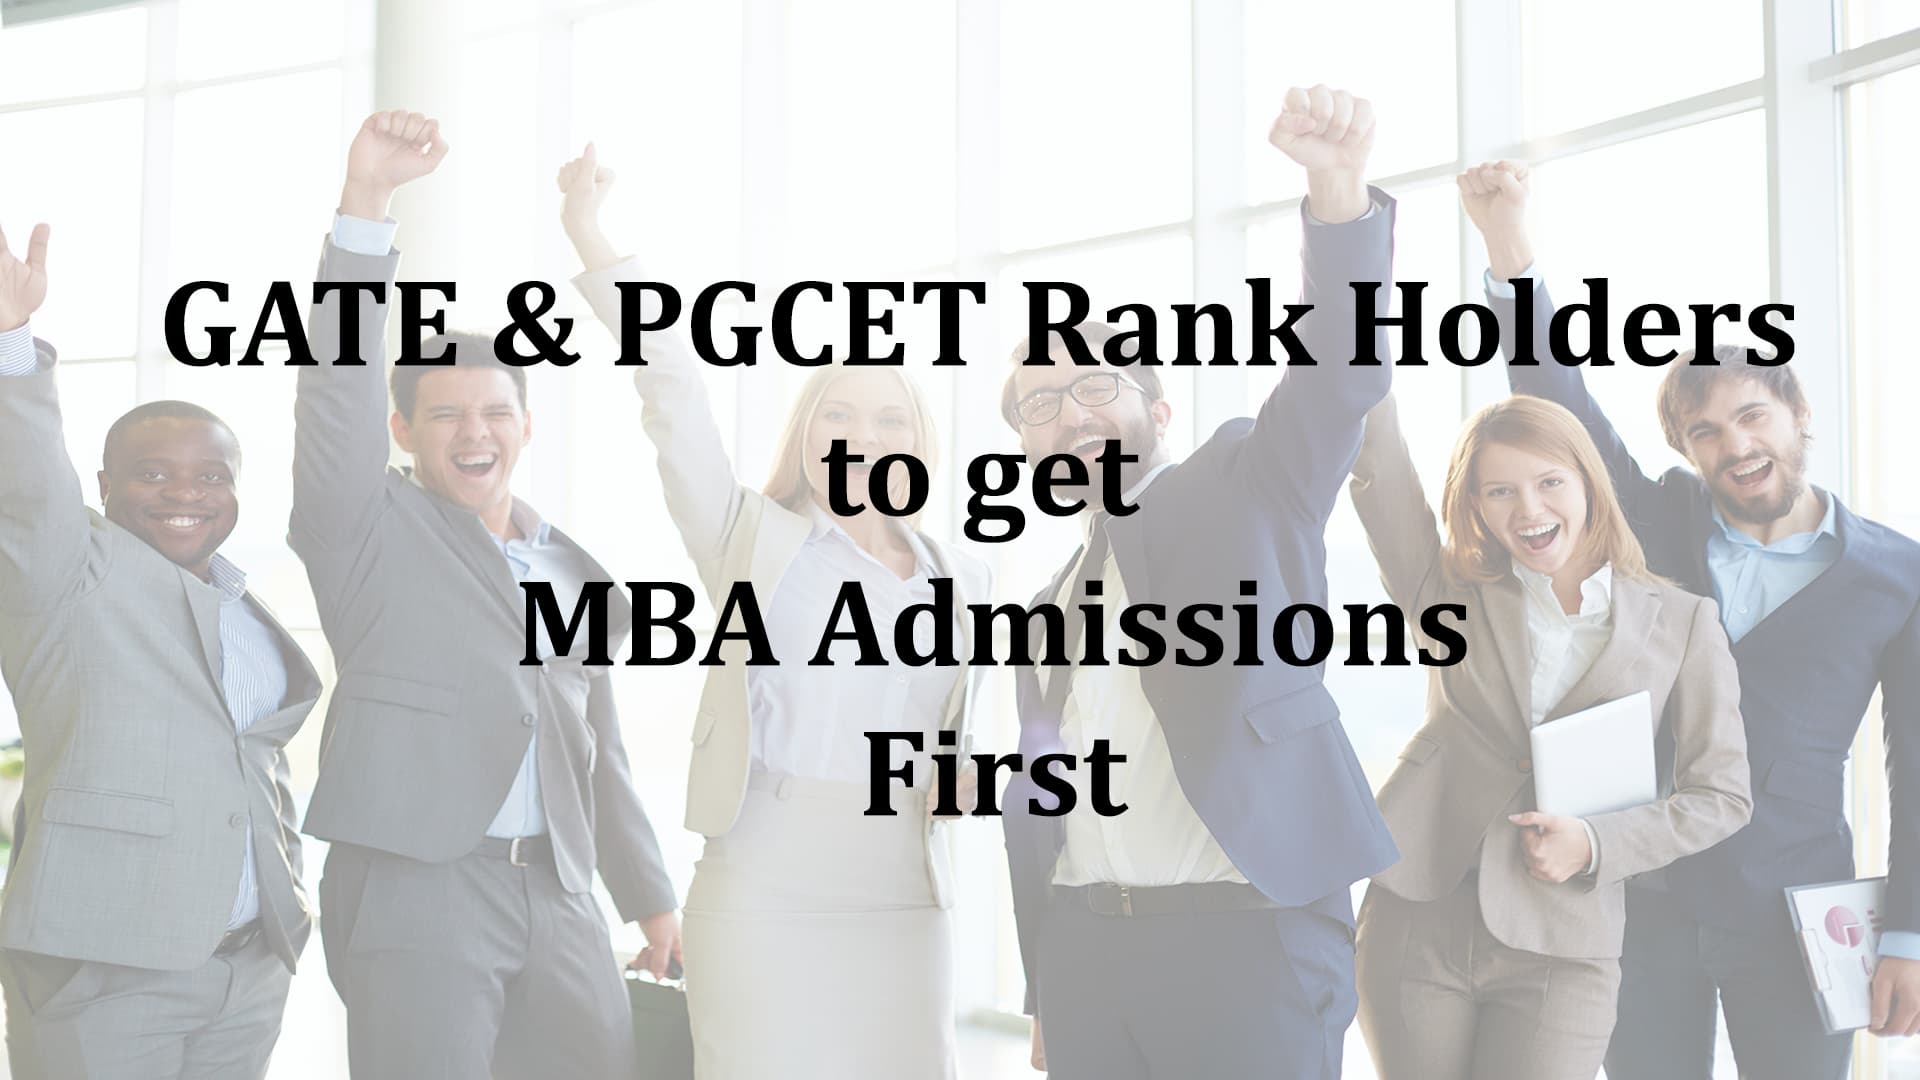 GATE & PGCET Rank Holders to get MBA Admissions First